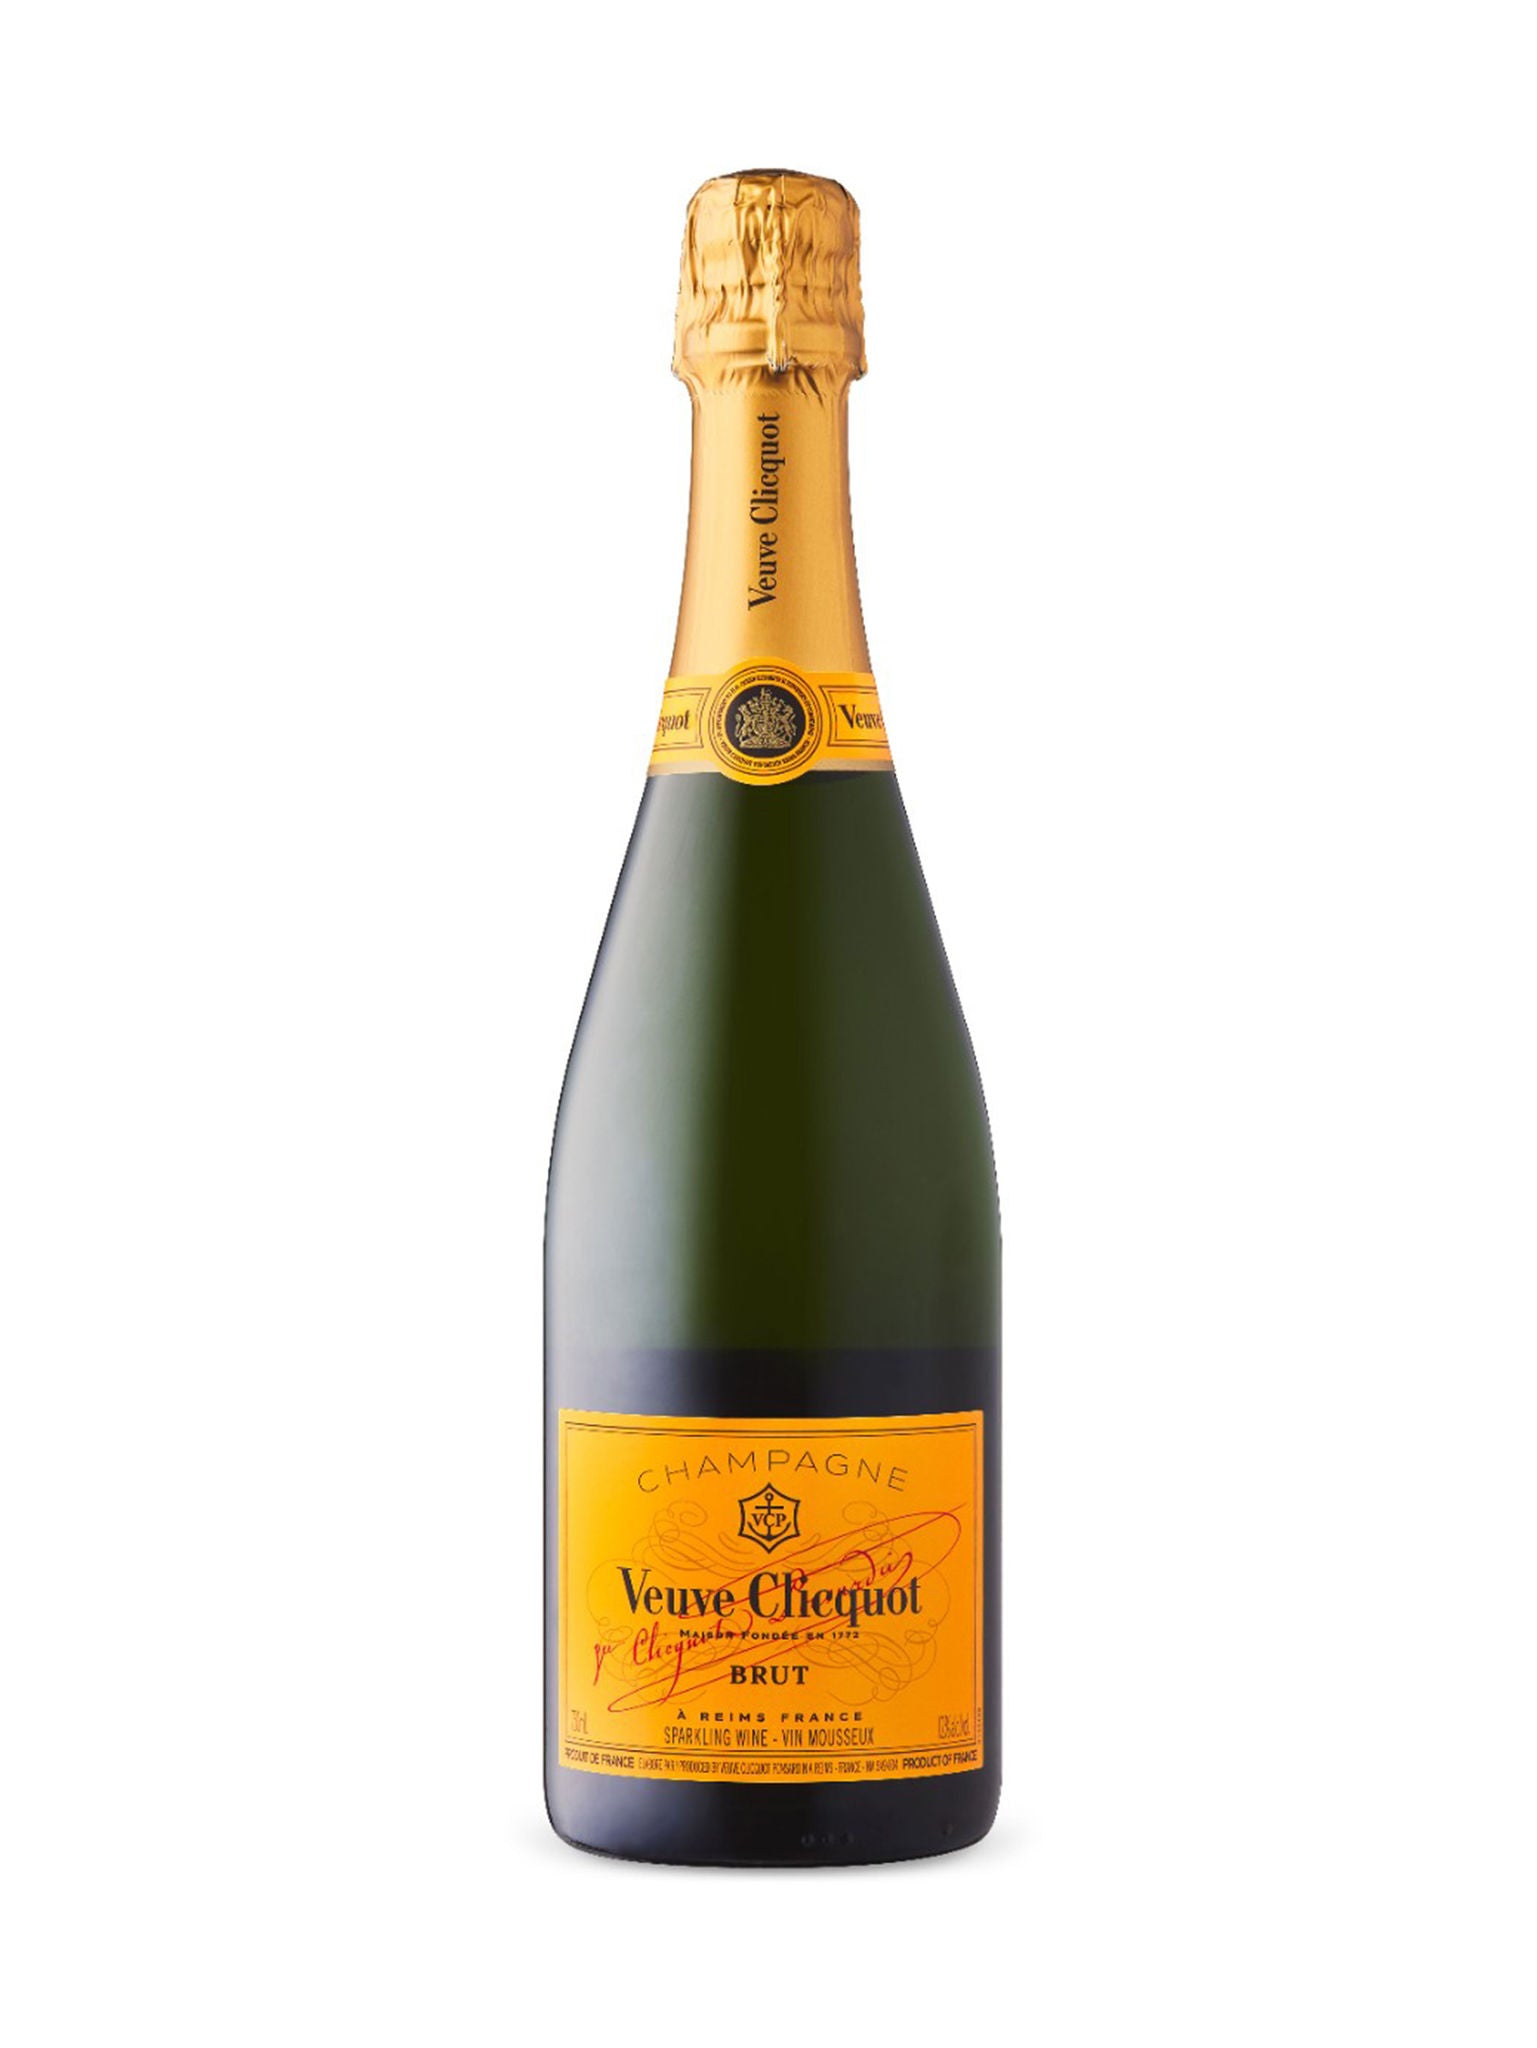 Veuve Clicquot Brut Champagne (I acknowledge I am over 19 years of age)